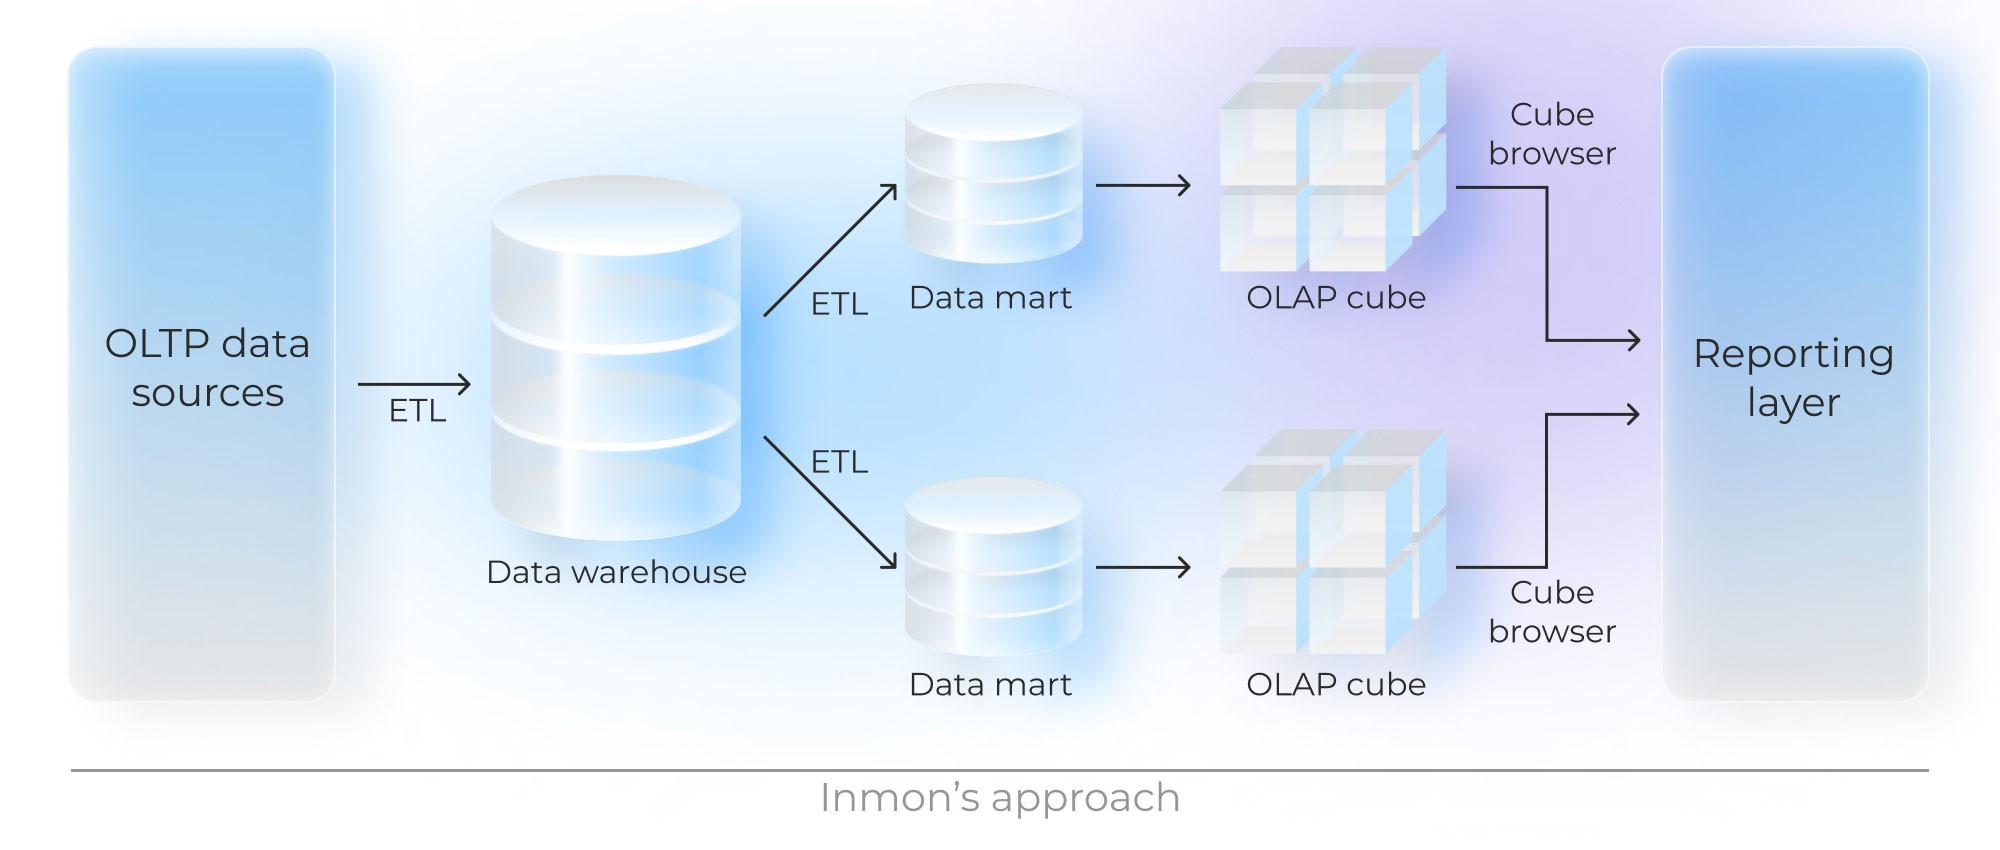 The second approach to building a data warehouse